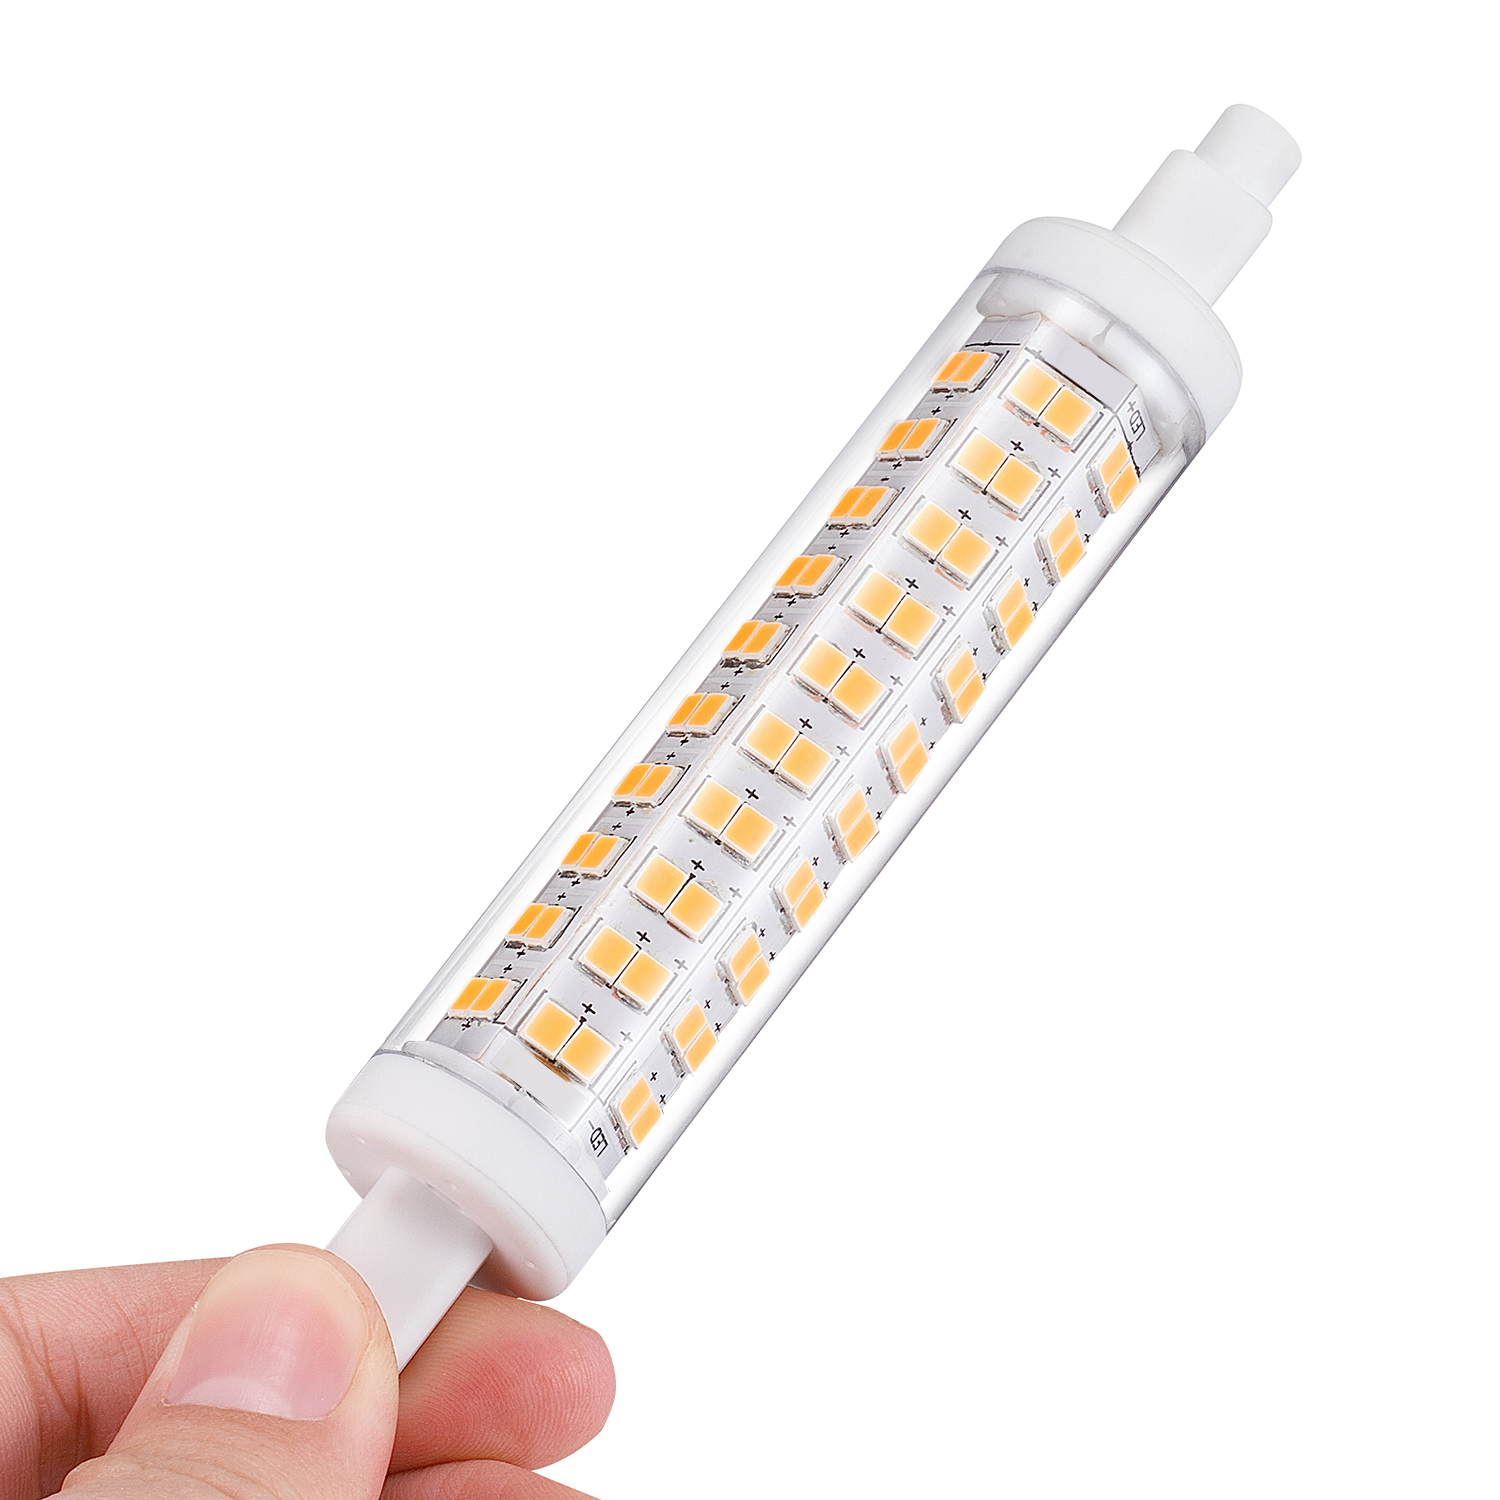 White Dayker R7s LED 118mm Dimmable 10W Double Ended J Type 1000LM AC 110V R7s Standard Floodlight Halogen Replacement Bulb